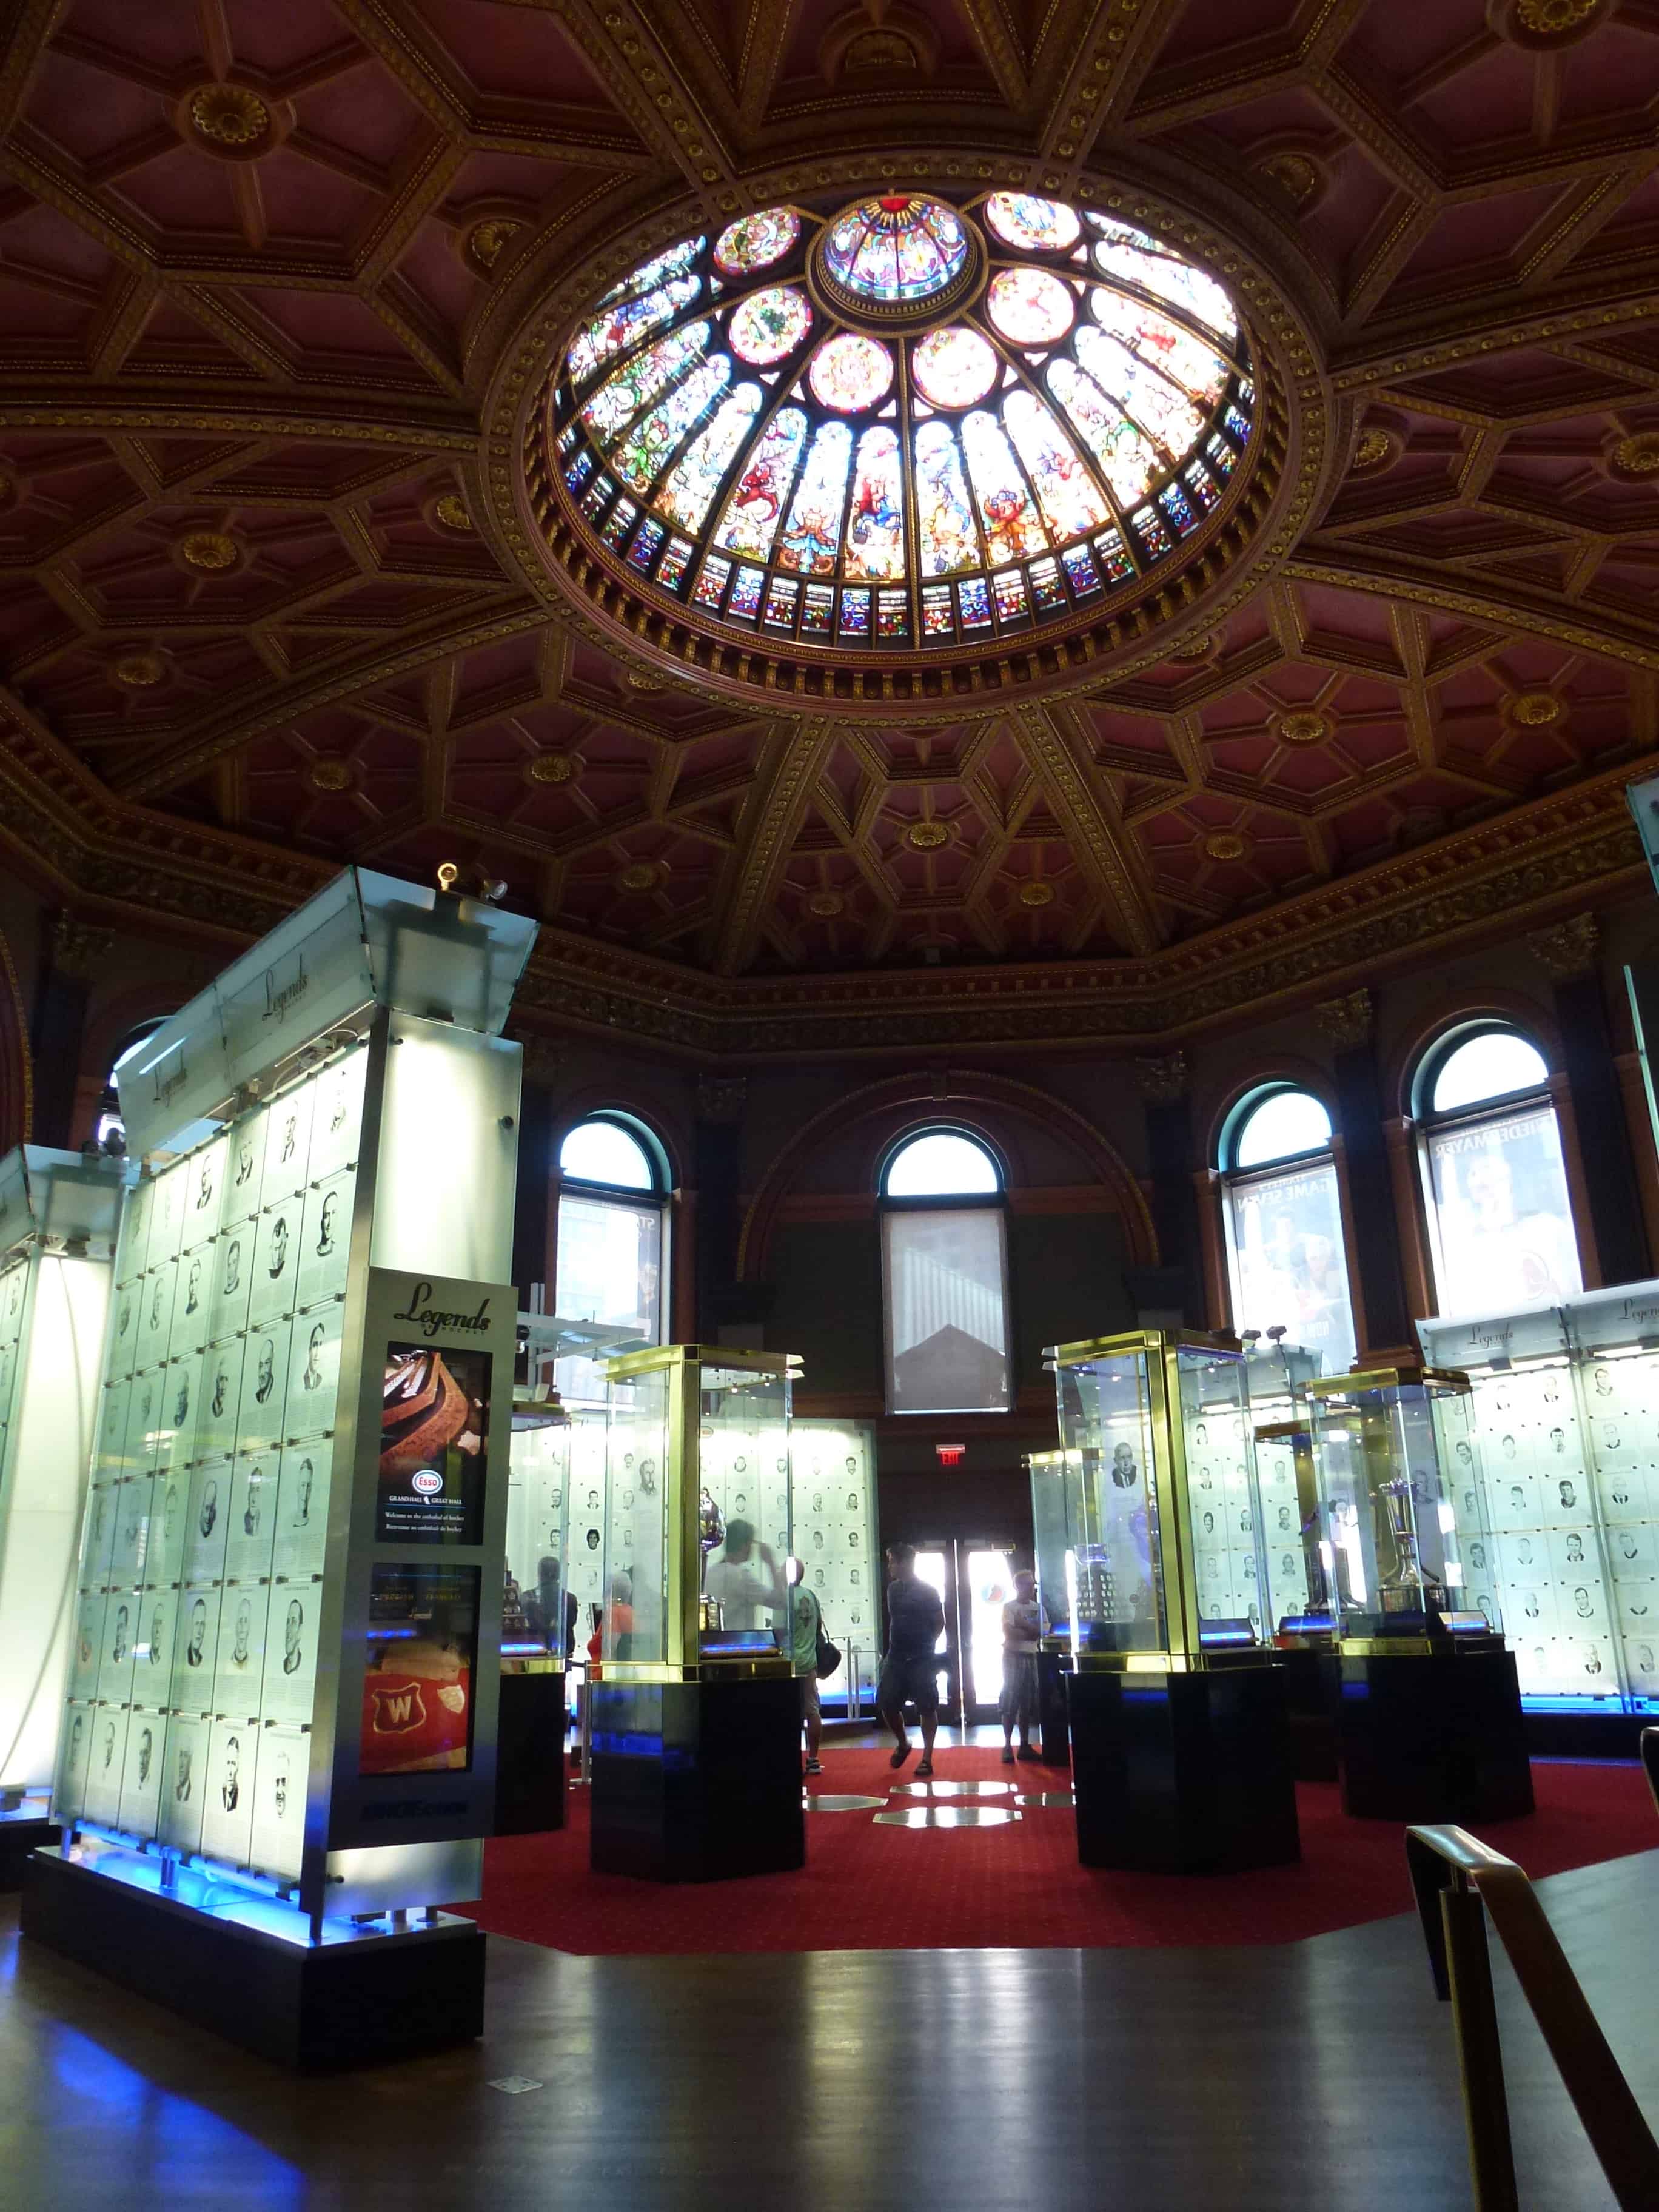 Trophy Room at the Hockey Hall of Fame in Toronto, Ontario, Canada